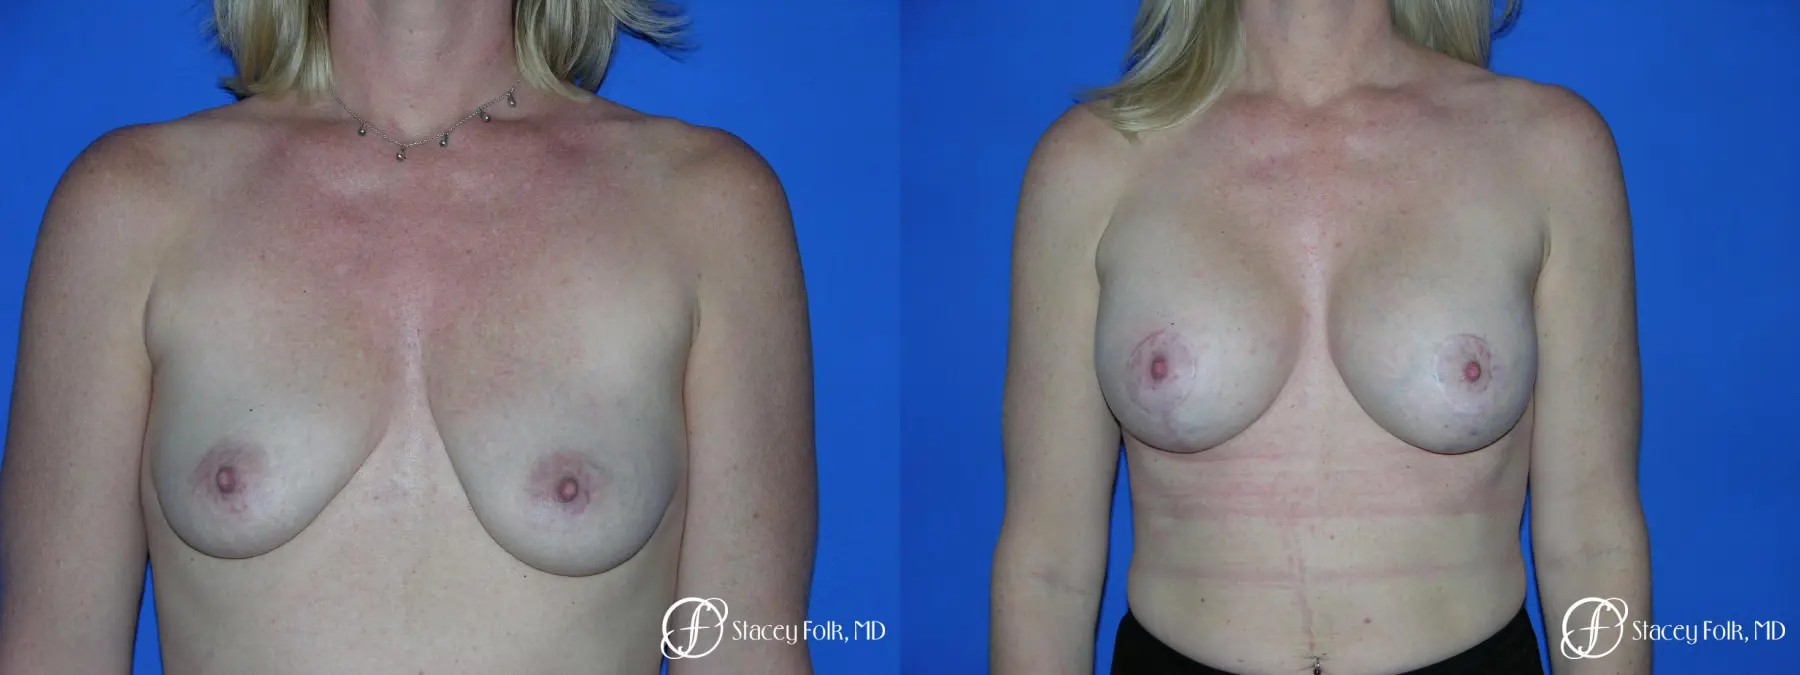 Denver Breast Lift and Augmentation 4555 - Before and After